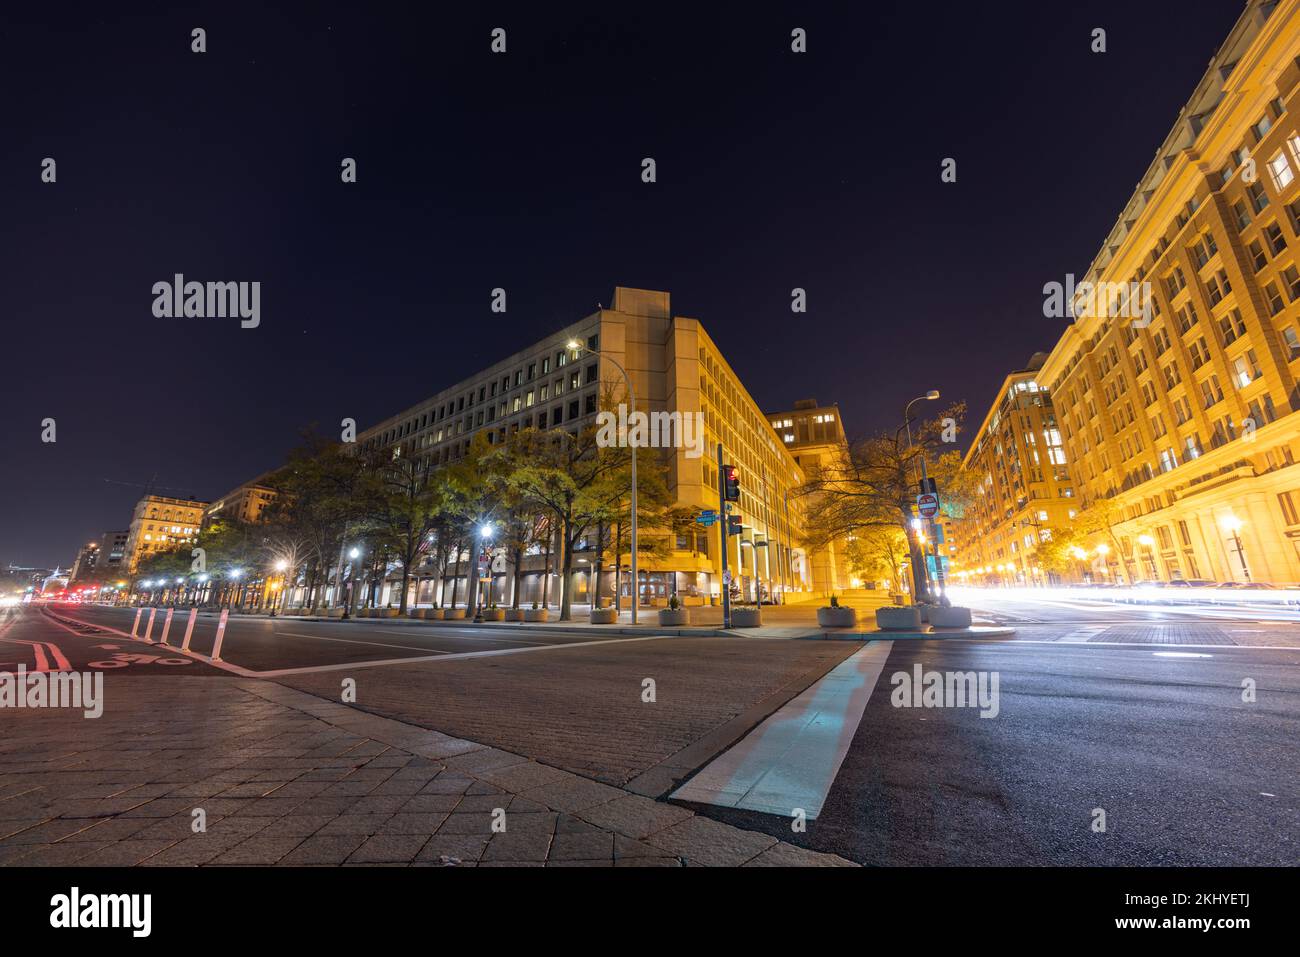 The J. Edgar Hoover Building, headquarters of the Federal Bureau of Investigation (FBI), in Washington, DC, seen at night from Pennsylvania Avenue Stock Photo